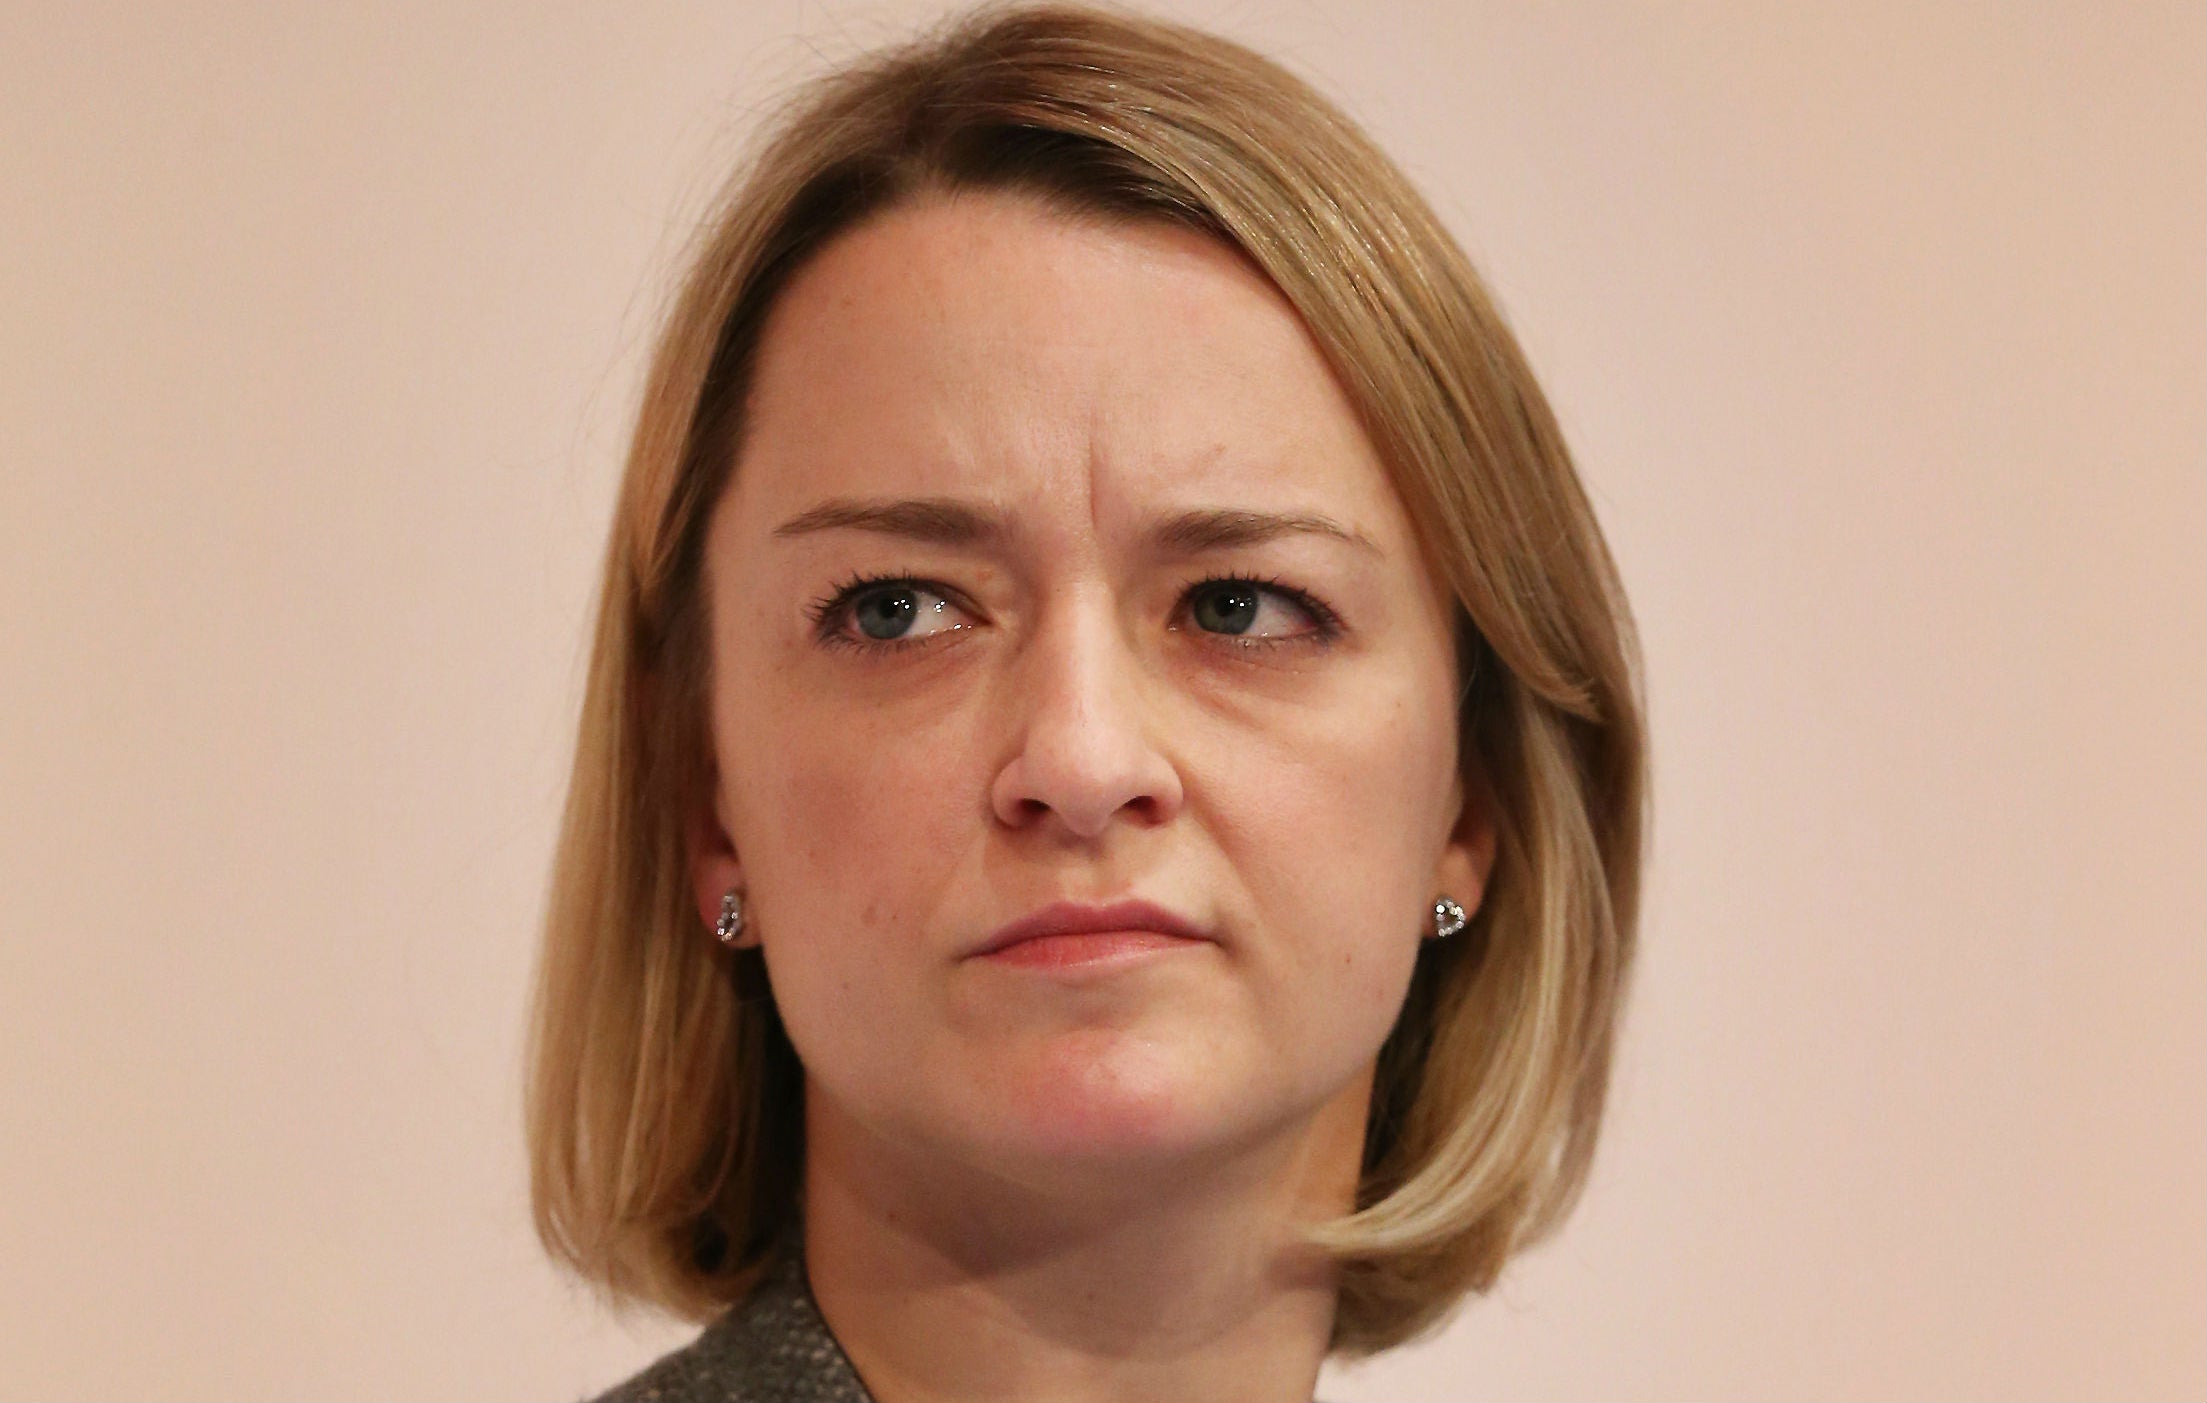 A petition calling for Kuenssberg to be sacked was taken down yesterday after it became a focal point for sexist abuse